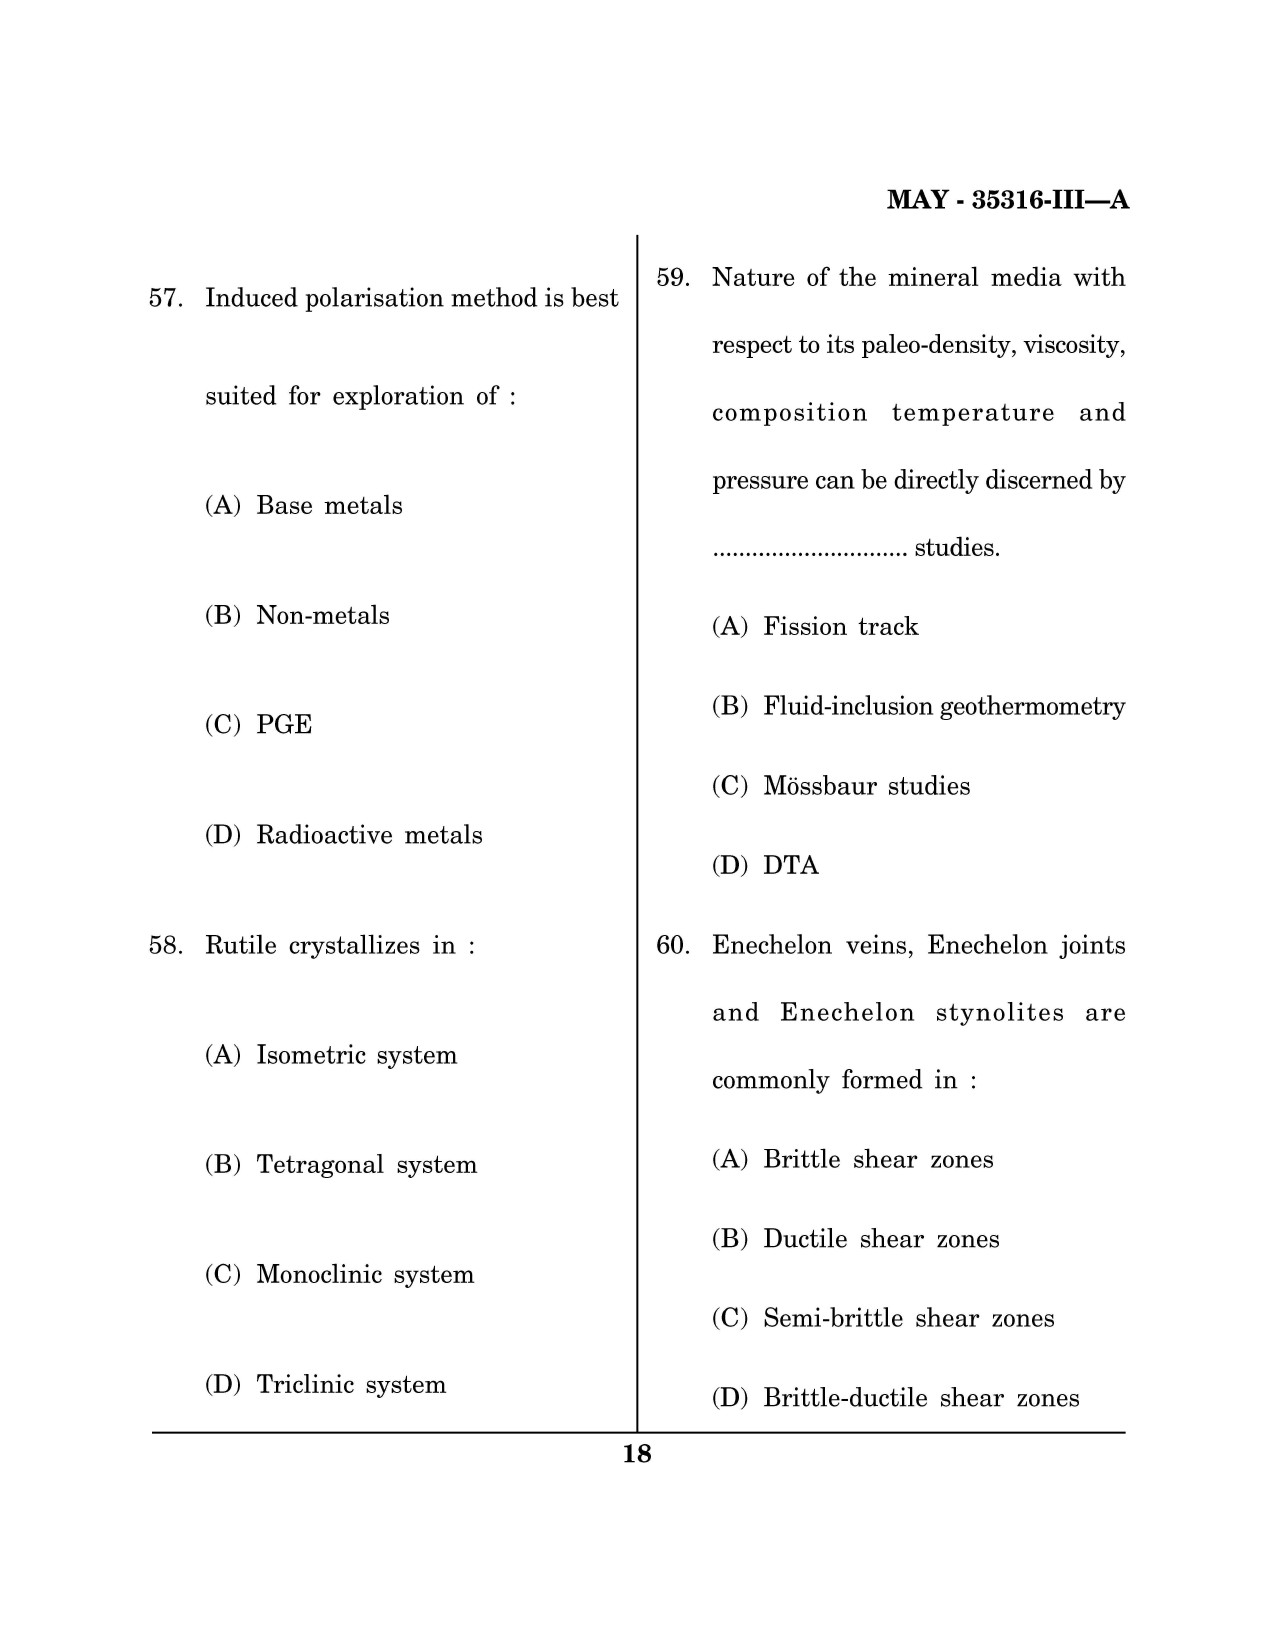 Maharashtra SET Earth Atmospheric Ocean Planetary Science Question Paper III May 2016 17